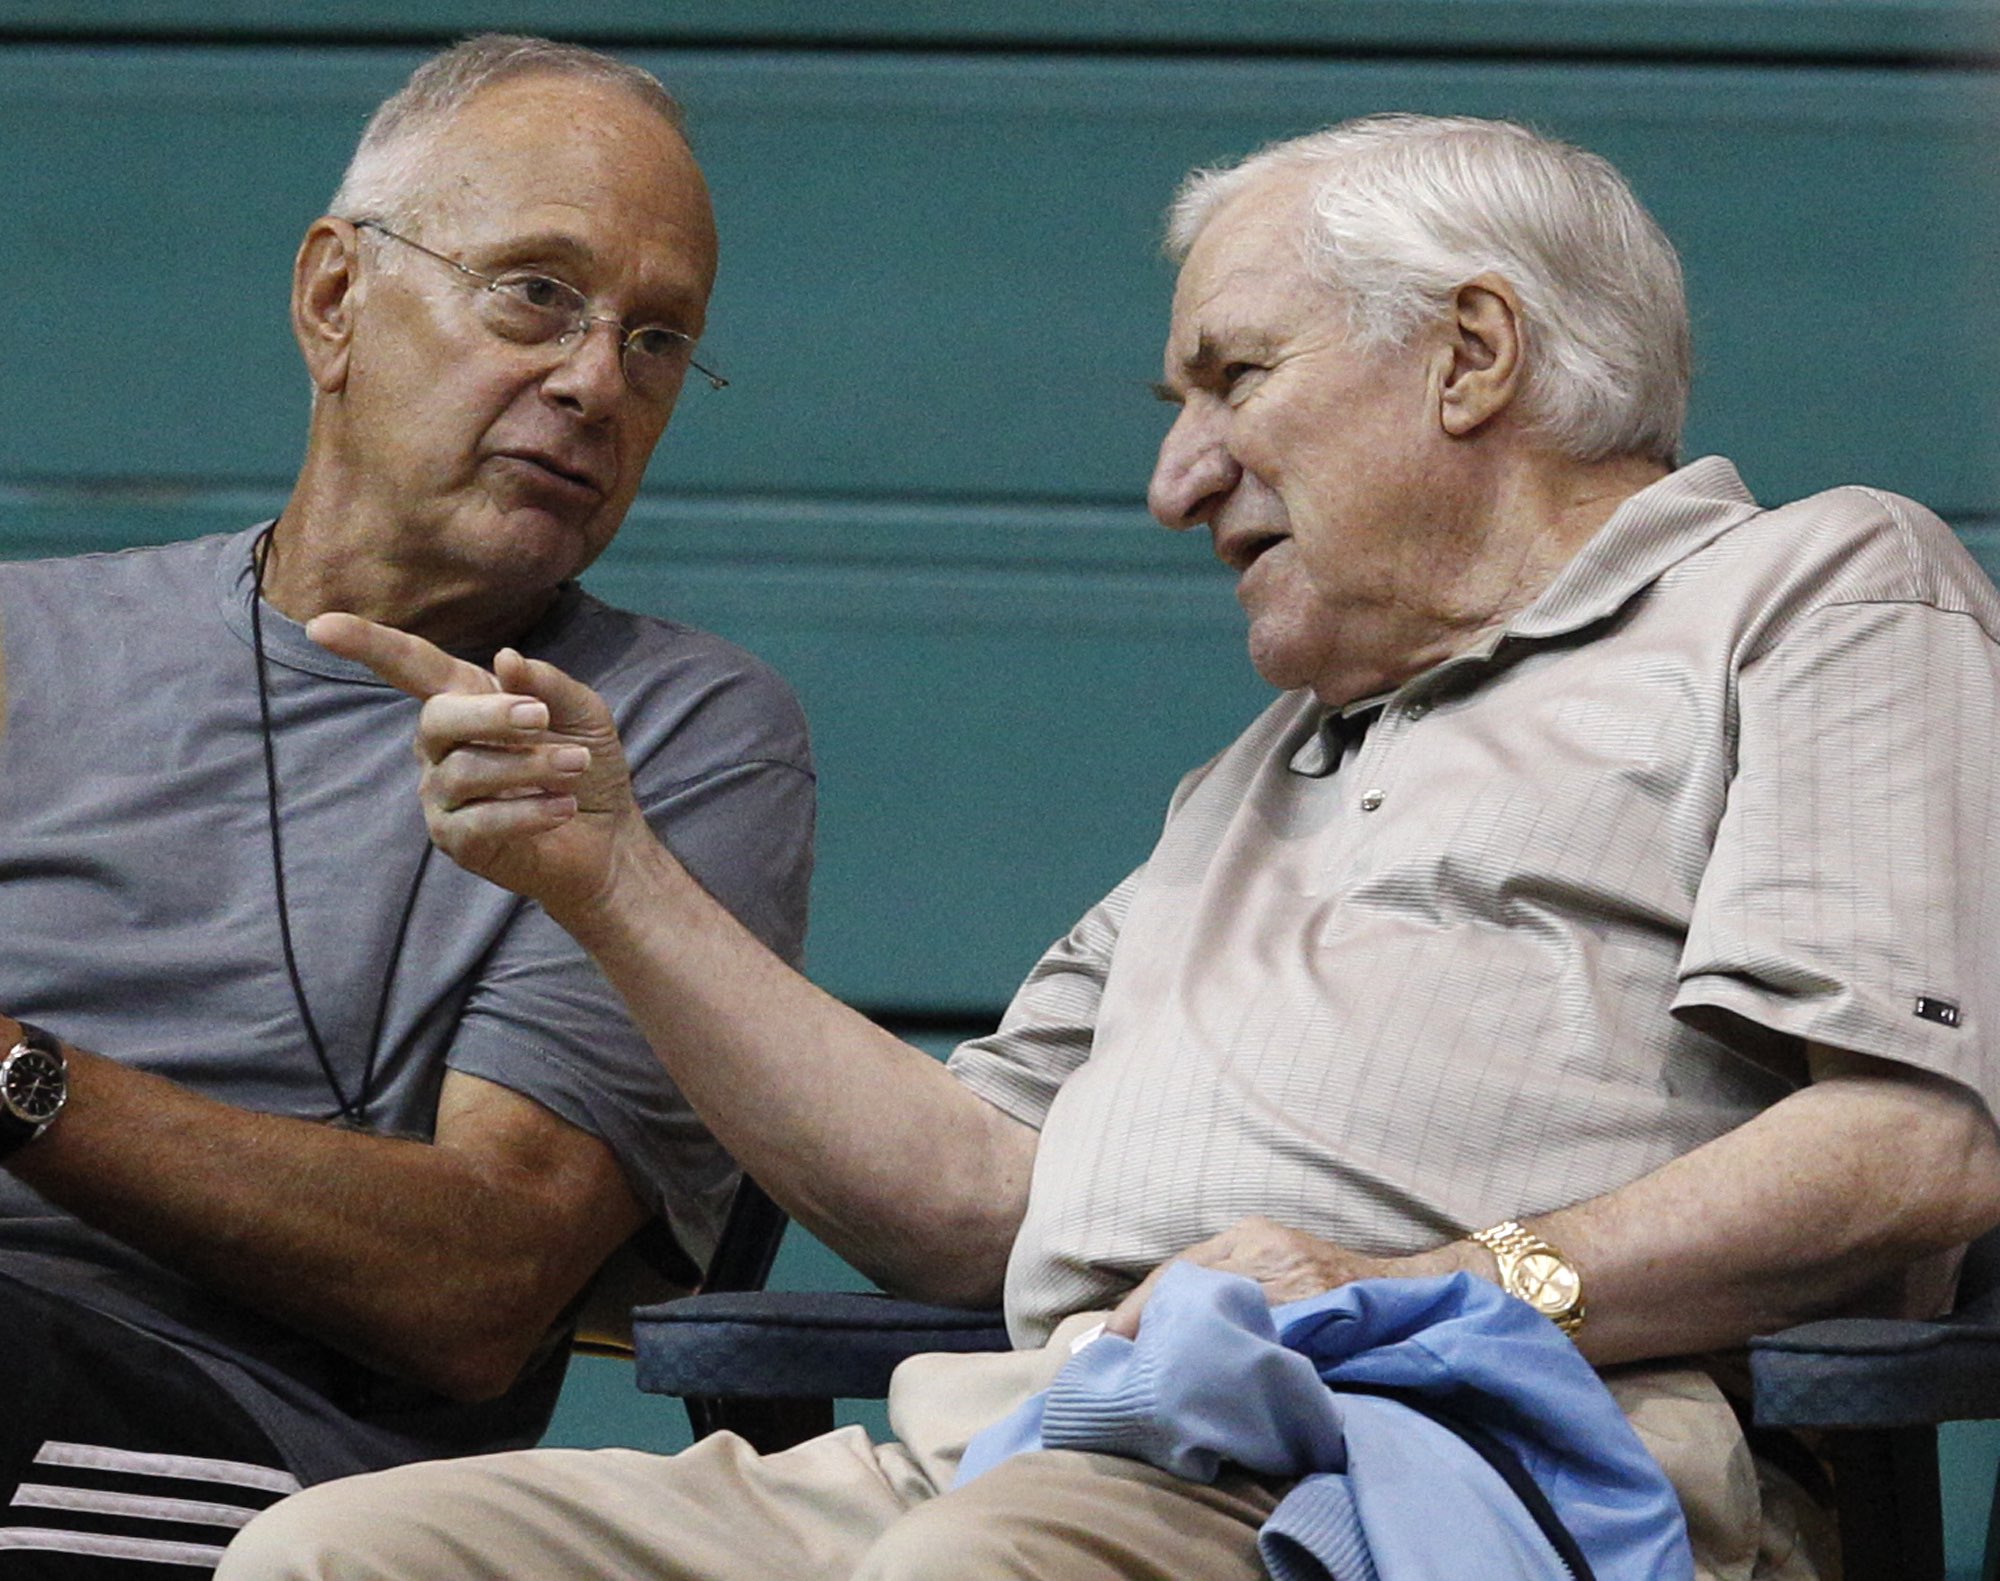 Happy birthday to Larry Brown - friend, mentor and one of the best coaches this sport has seen! 